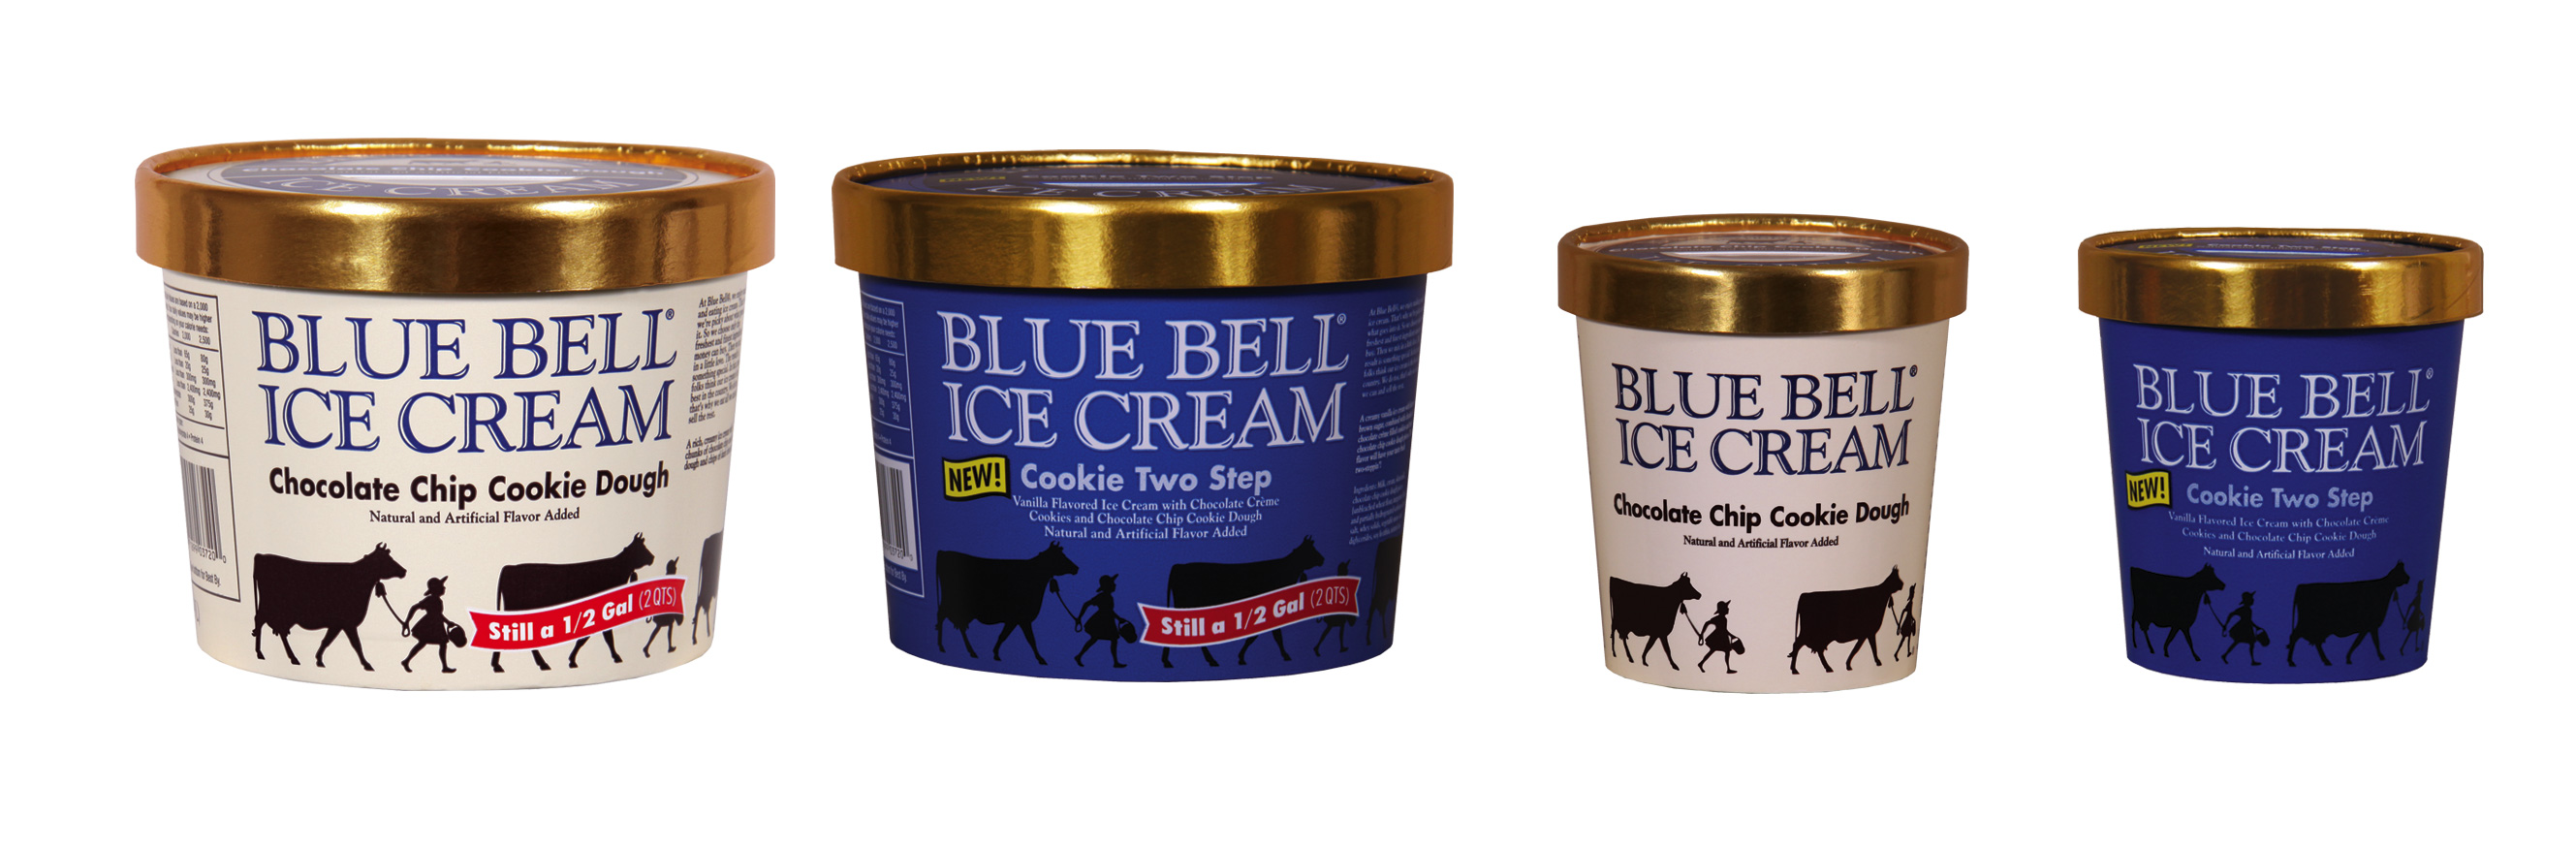 Blue Bell And Publix Recall More Cookie Dough Ice Cream Due To Supplier’s Recall